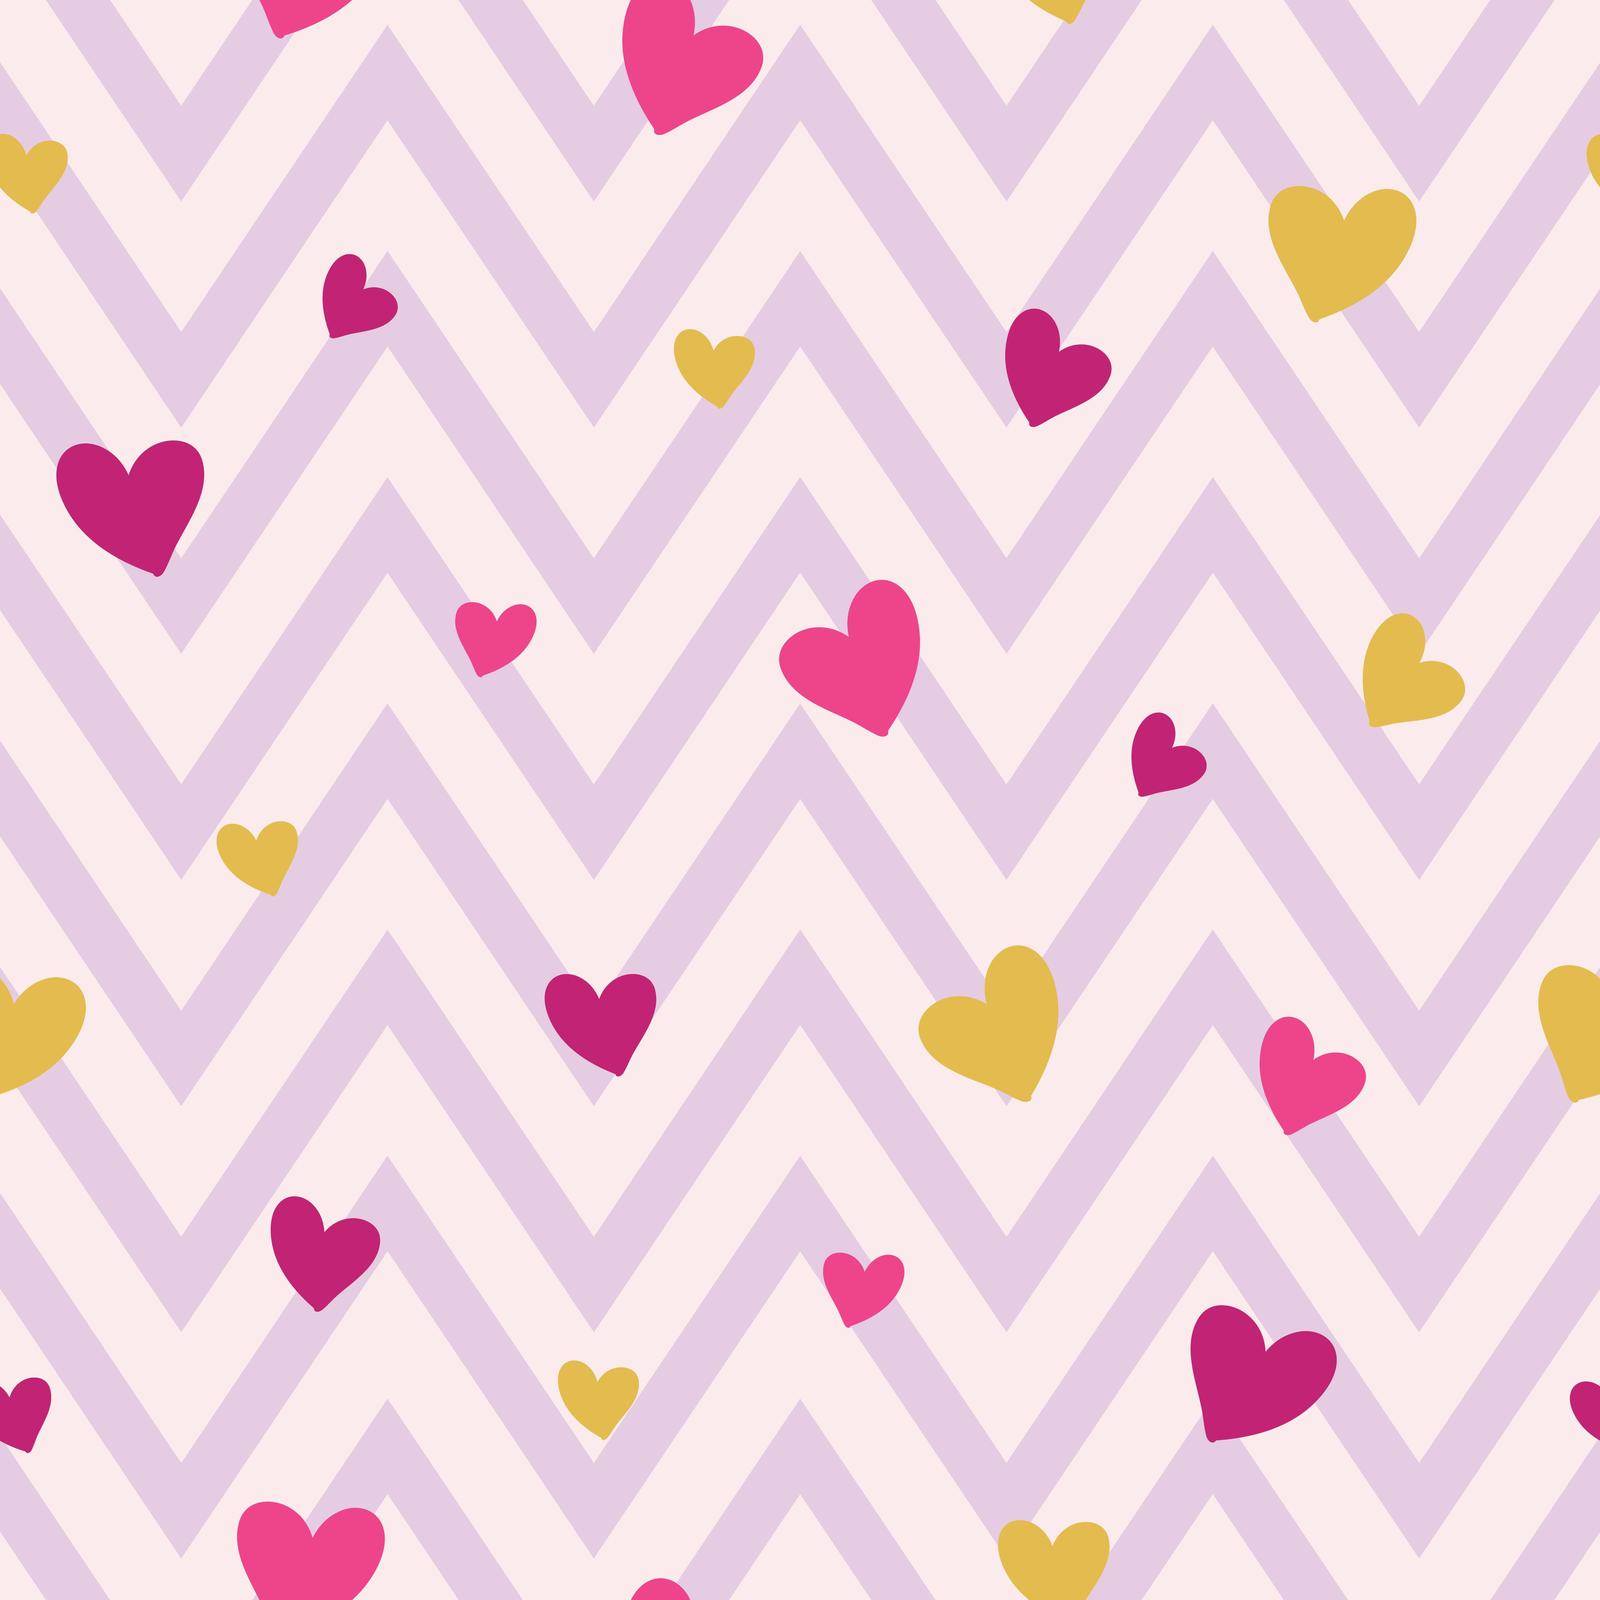 Seamless pattern with pink and gold hearts on pink chevron background by elinnet